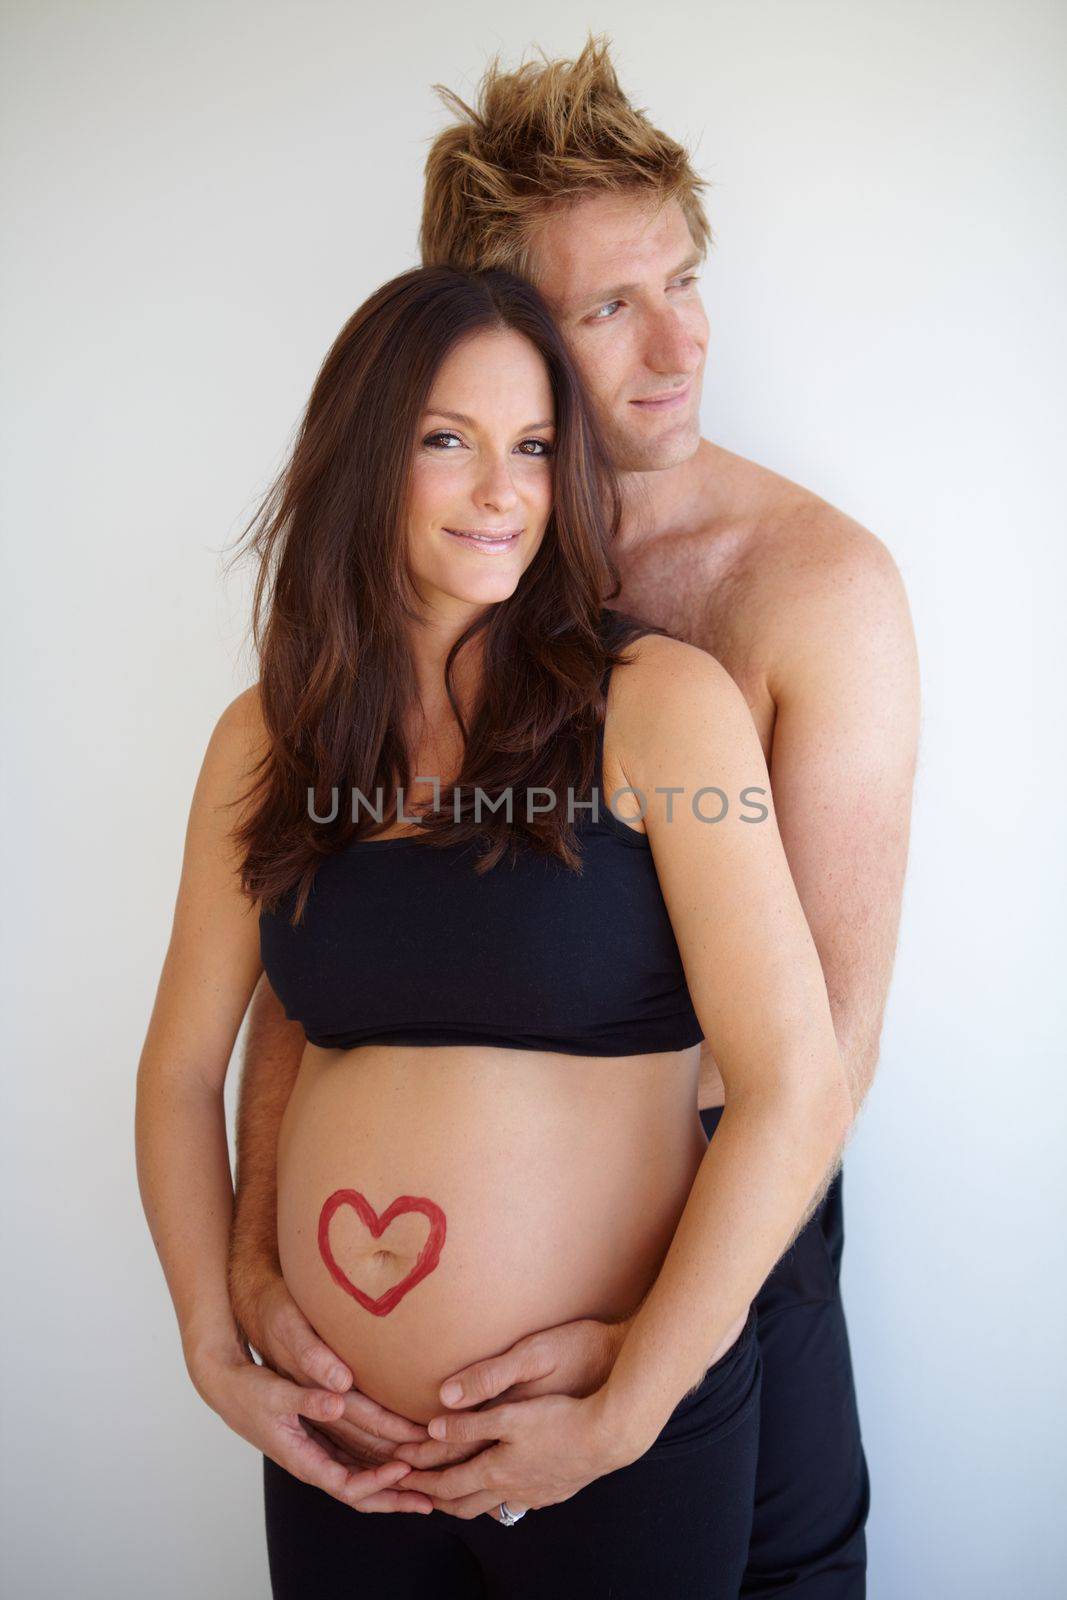 Sharing a bond that will never fade. Young expecting couple standing together with a heart shape on the expecting motheramp039s belly